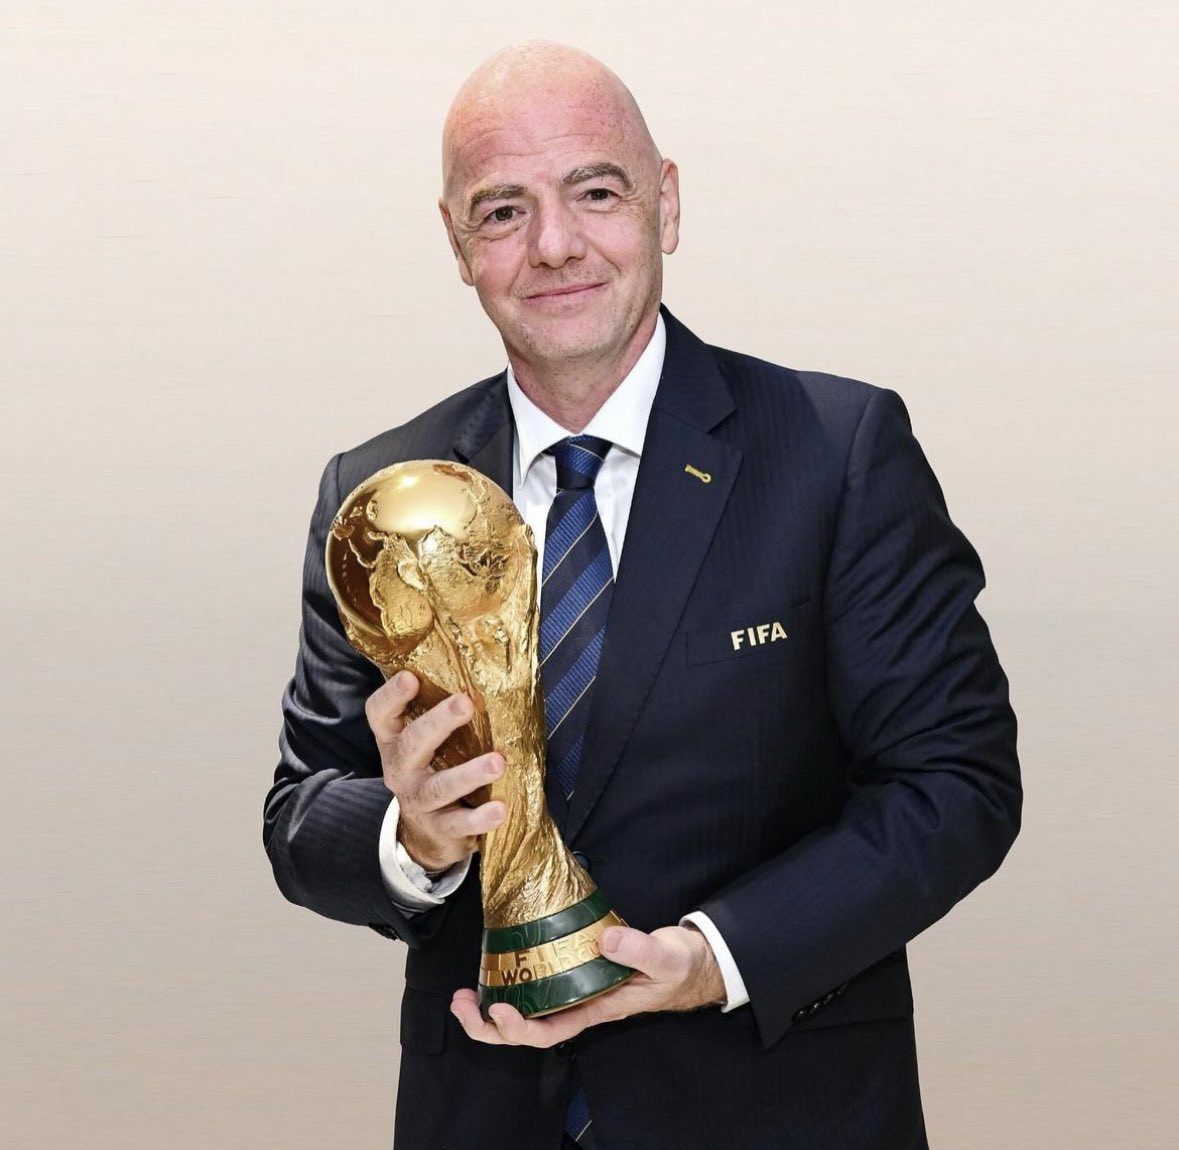 Infantino, president of FIFA, confirms that the 2034 World Cup will be held in Saudi Arabia: "Football unites the world like no other sport" 